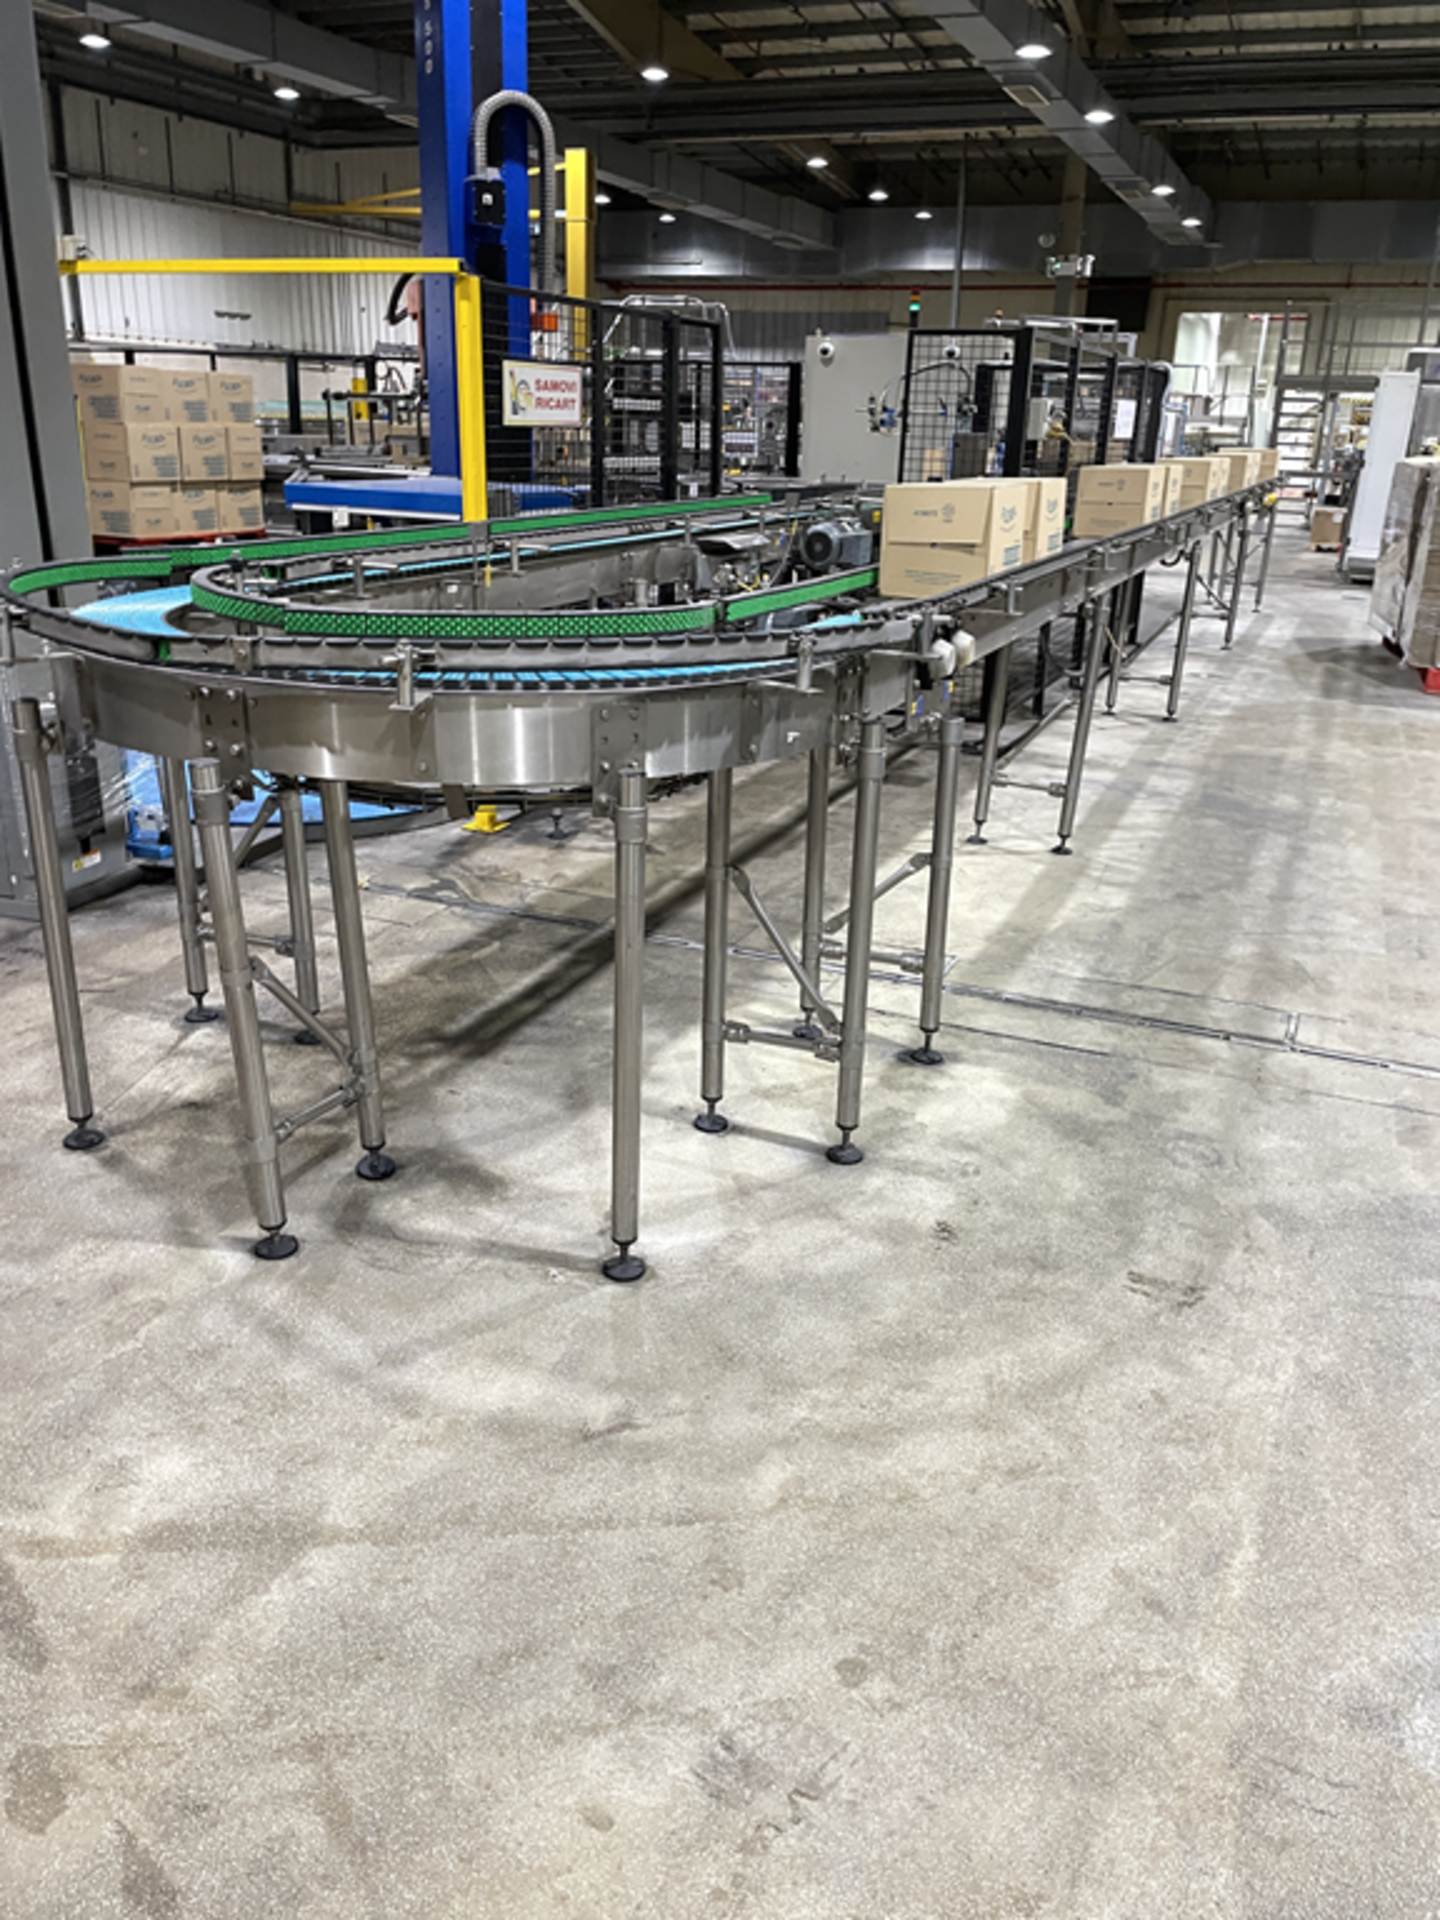 Two Sections of Powered Box Conveyor Feeding Pallets